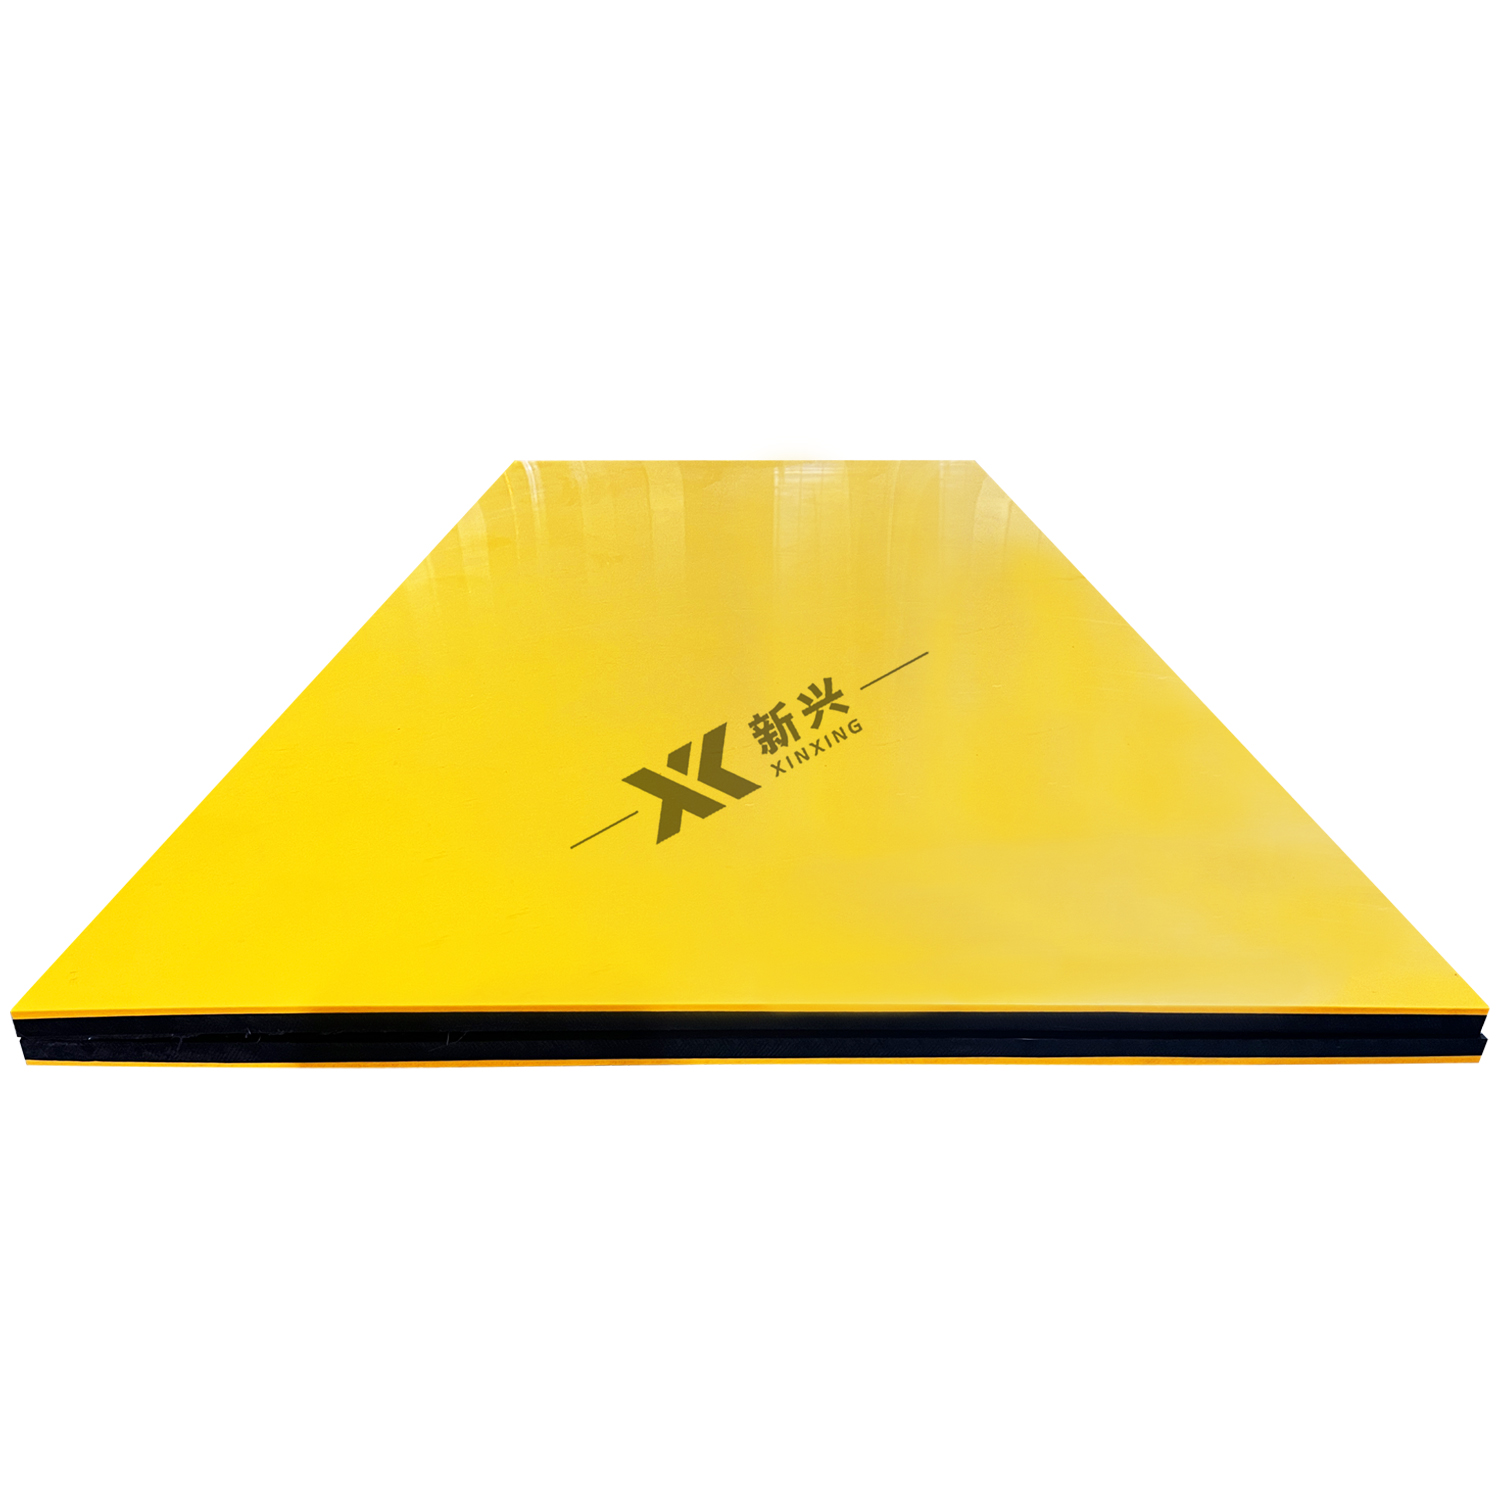 Extruded Sandwich Three Layer Hdpe Double Color Plastic Sheet 